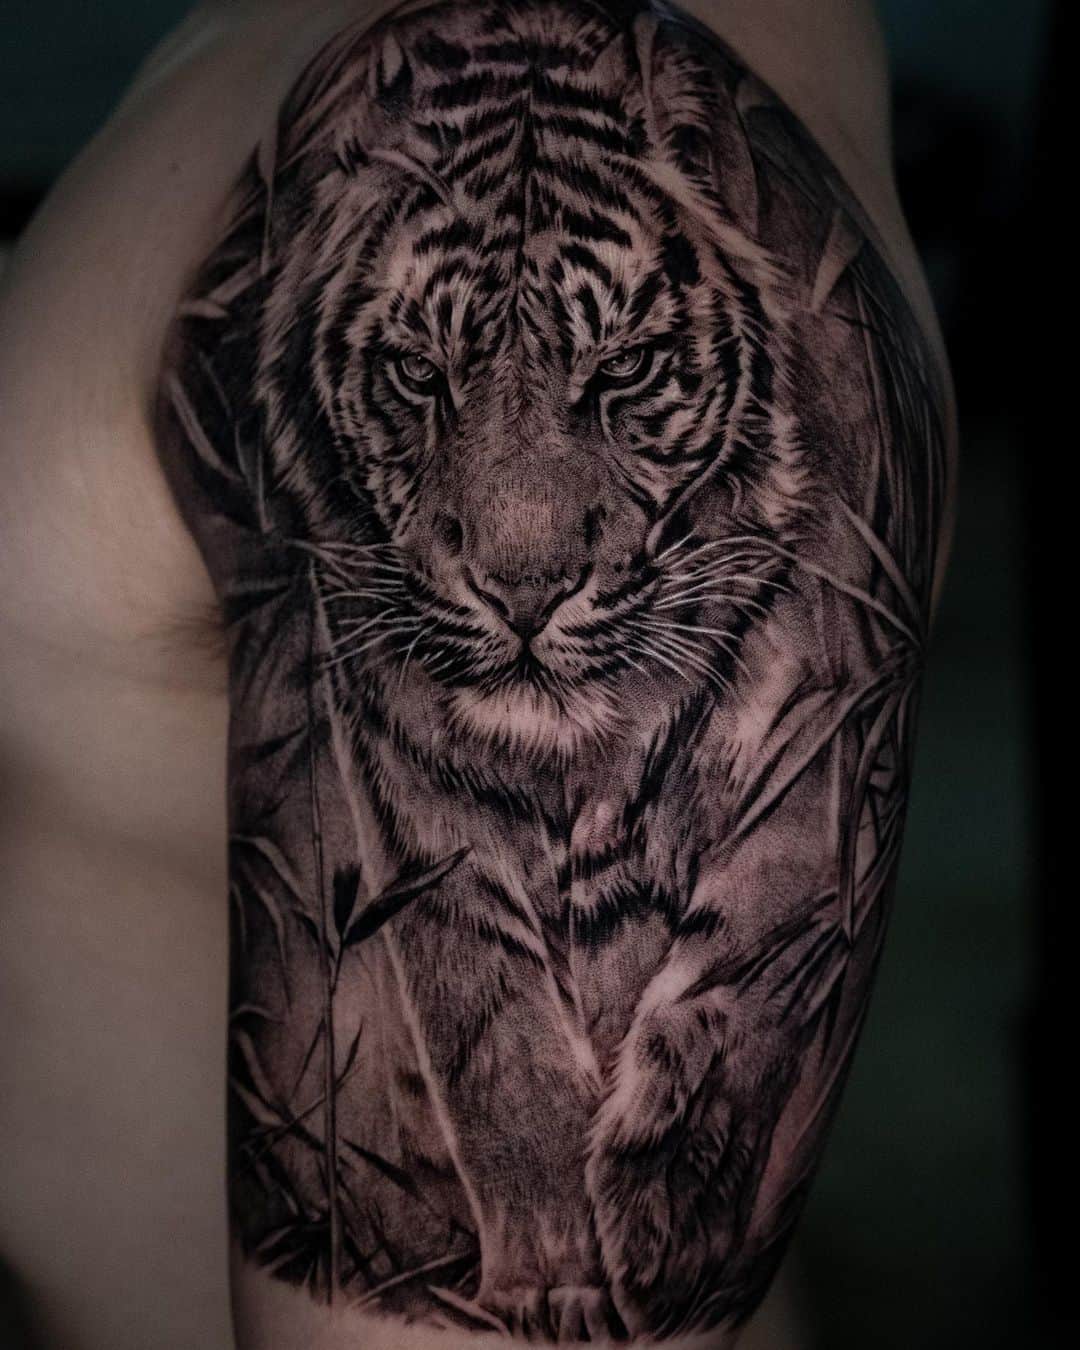 White Tiger healed and Panther 1 week by Justin at Eastern Pass Tattoo  in Philadelphia PA  rtattoos